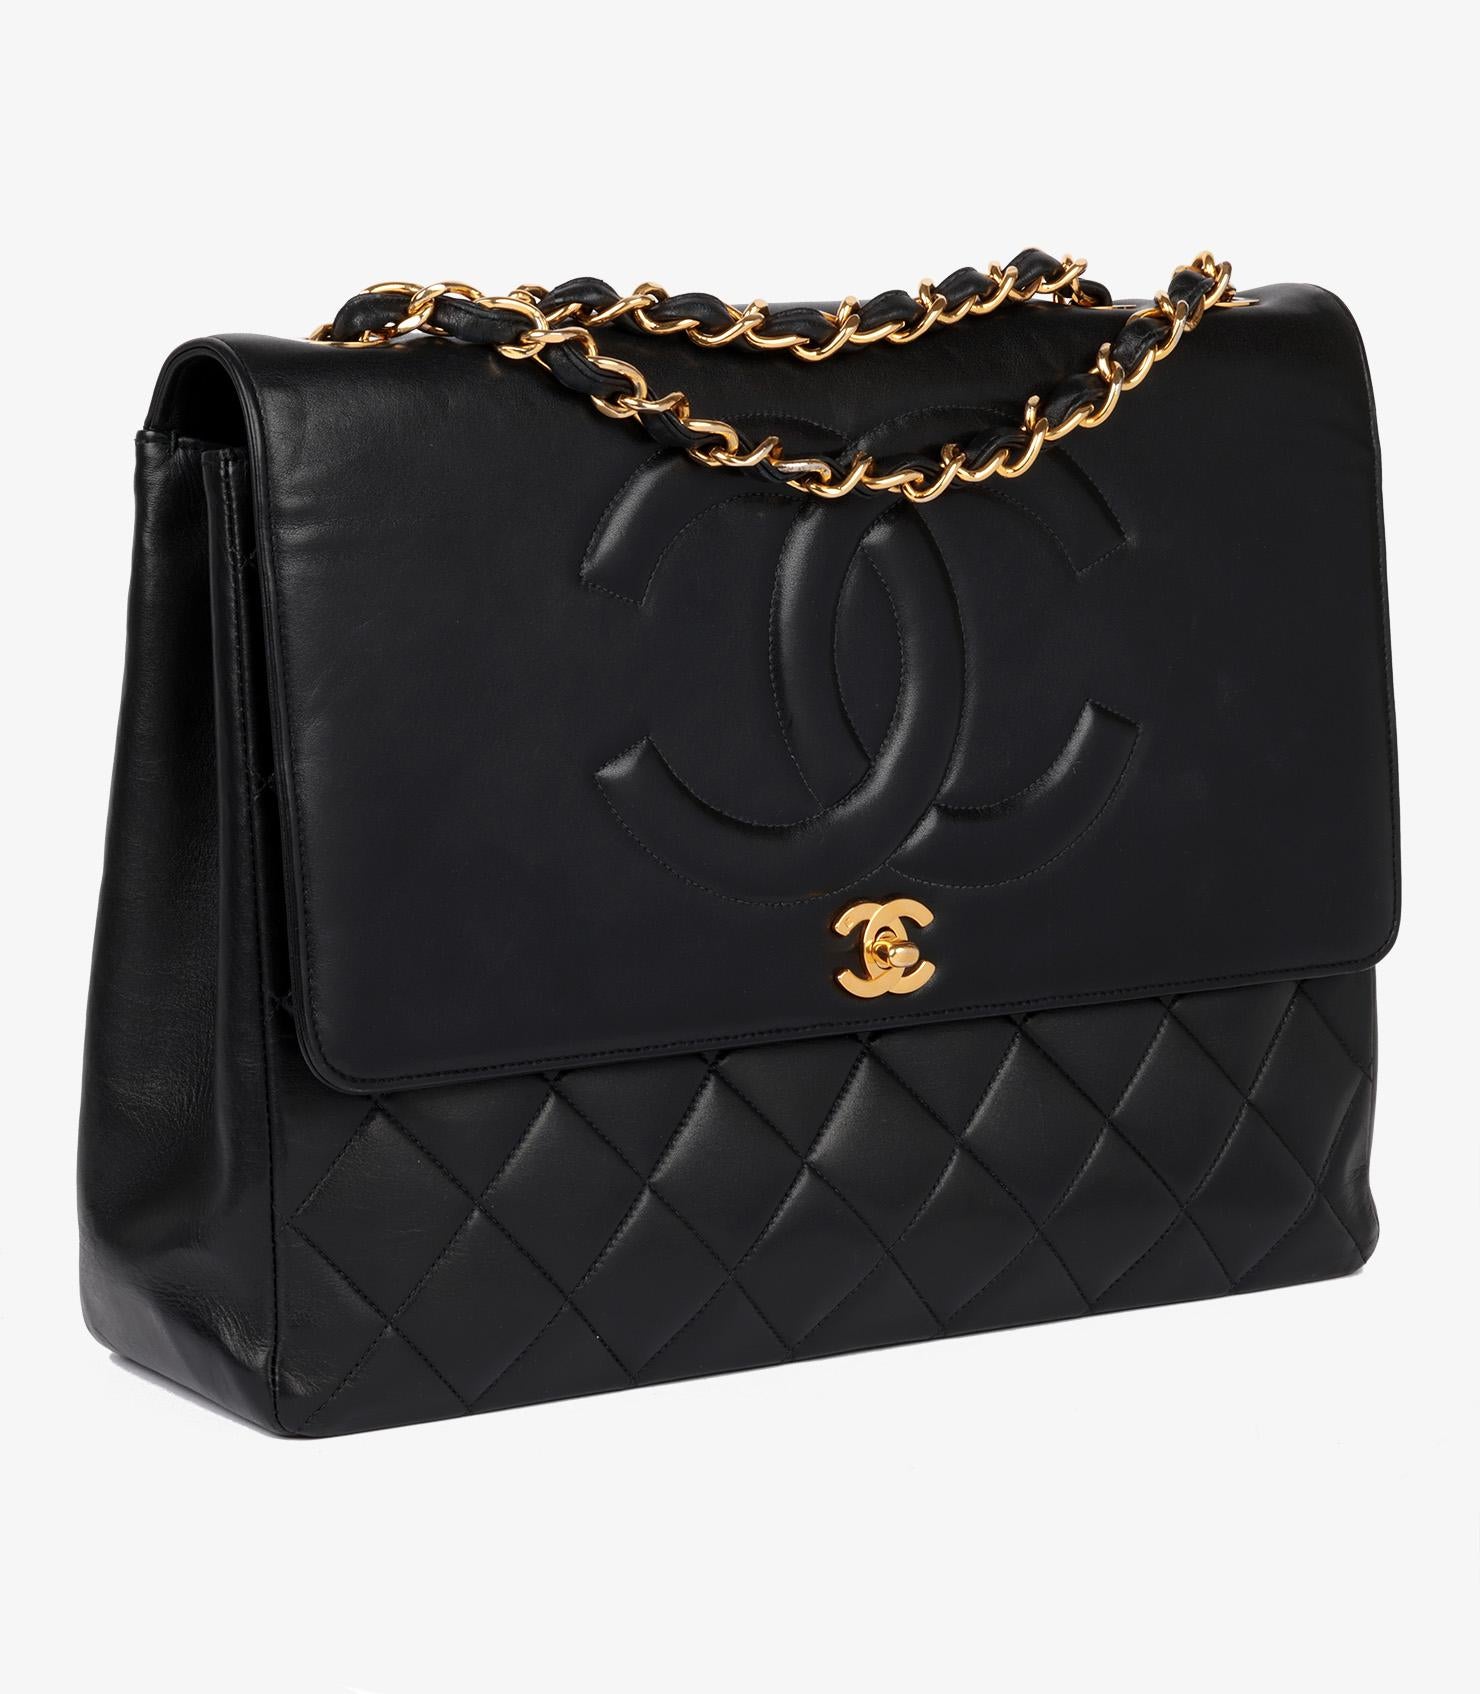 Chanel Black Quilted Lambskin Vintage Timeless Maxi Jumbo Classic Flap Bag In Excellent Condition For Sale In Bishop's Stortford, Hertfordshire